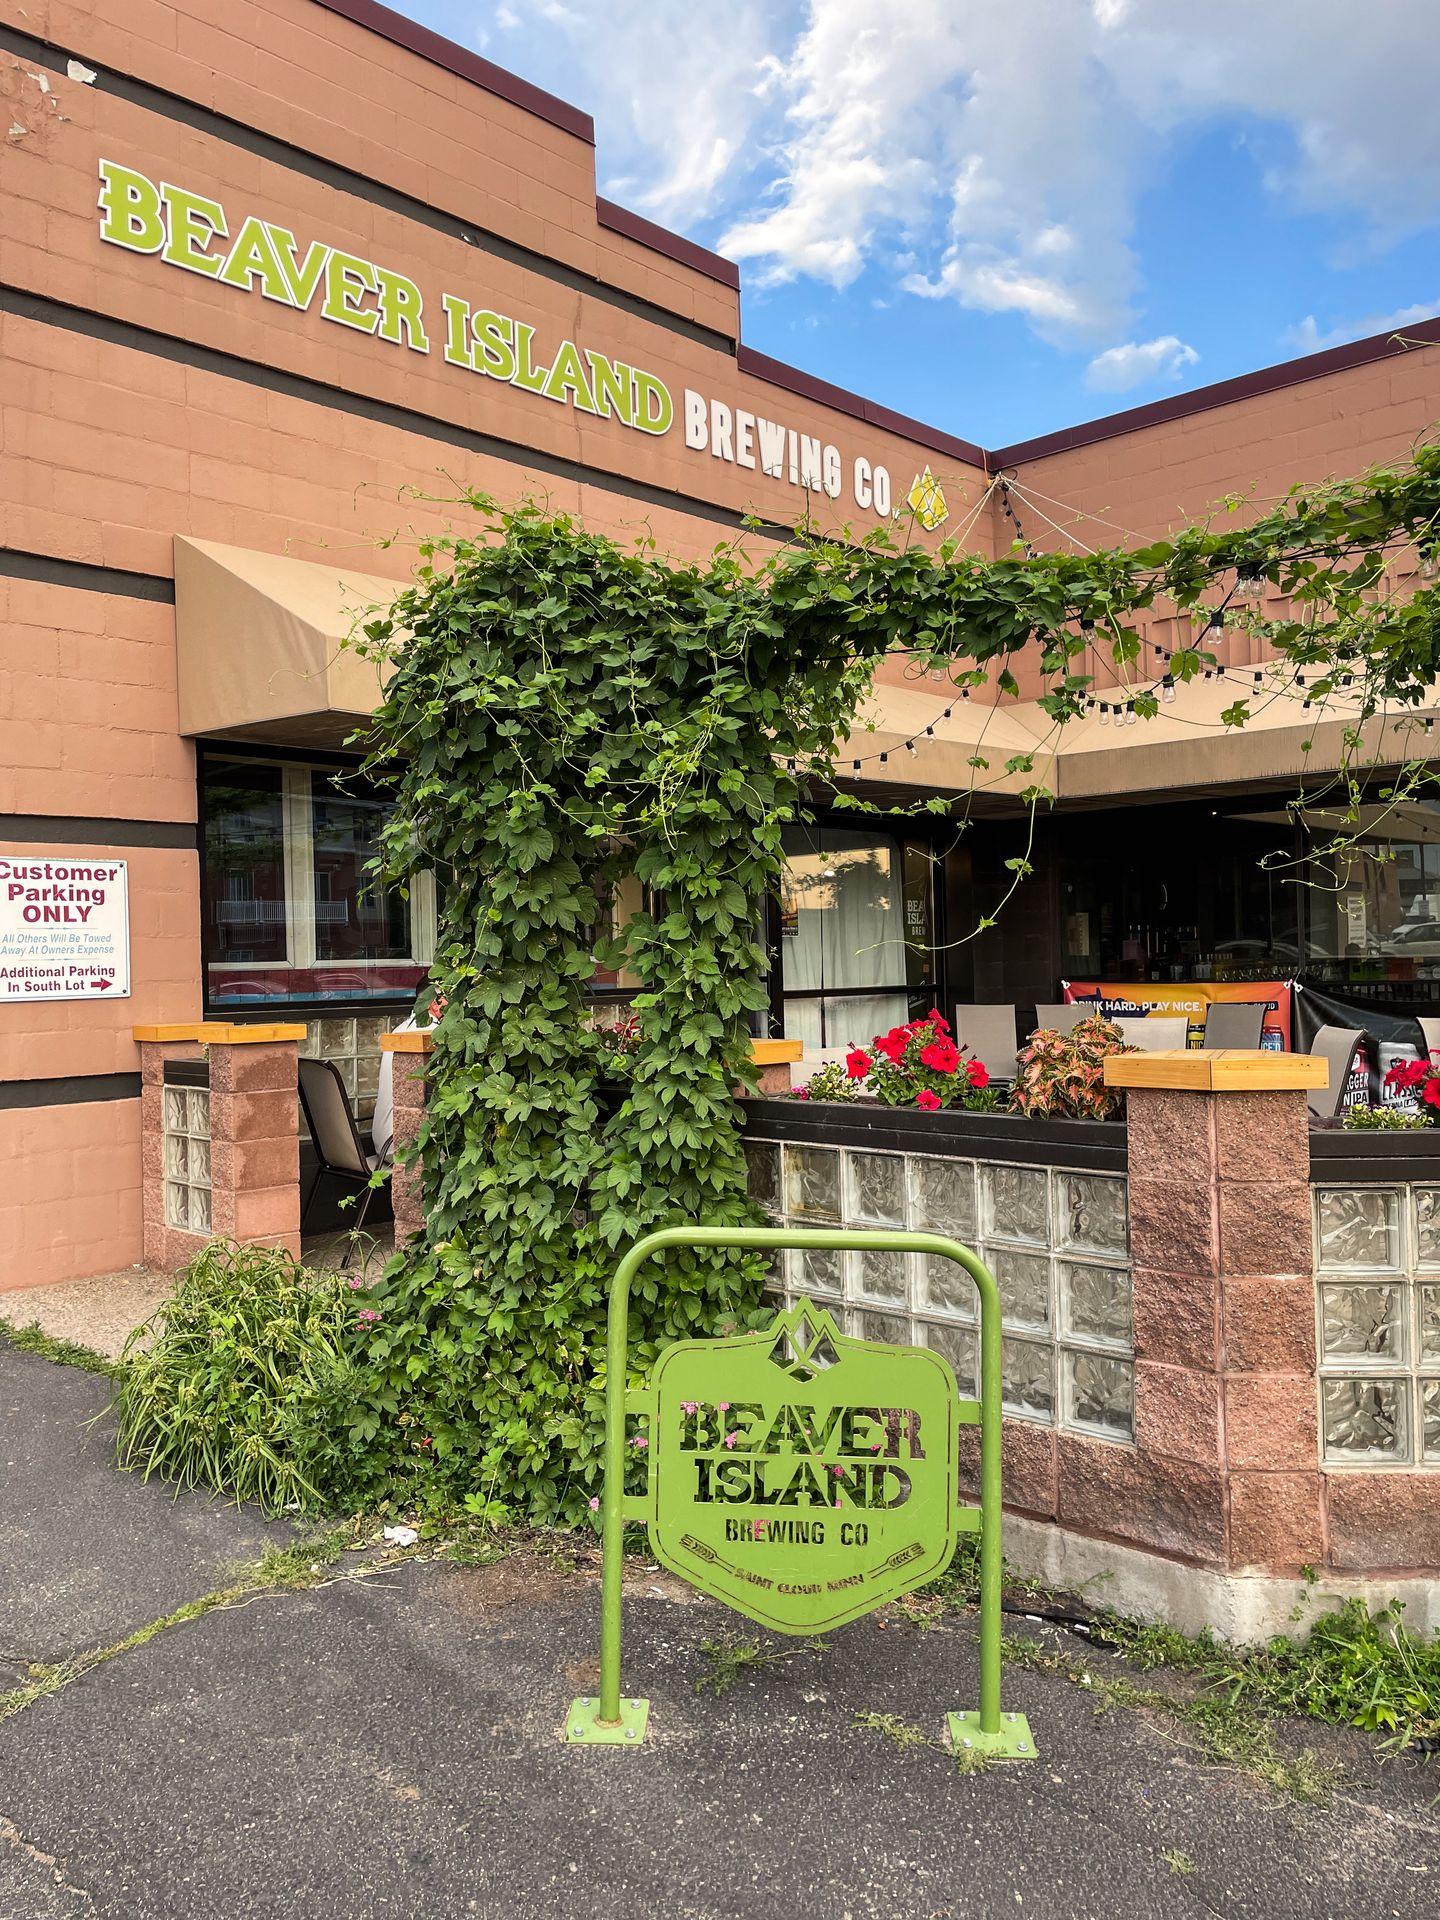 The exterior of Beaver Island Brewing, a building with a green gate and a sign